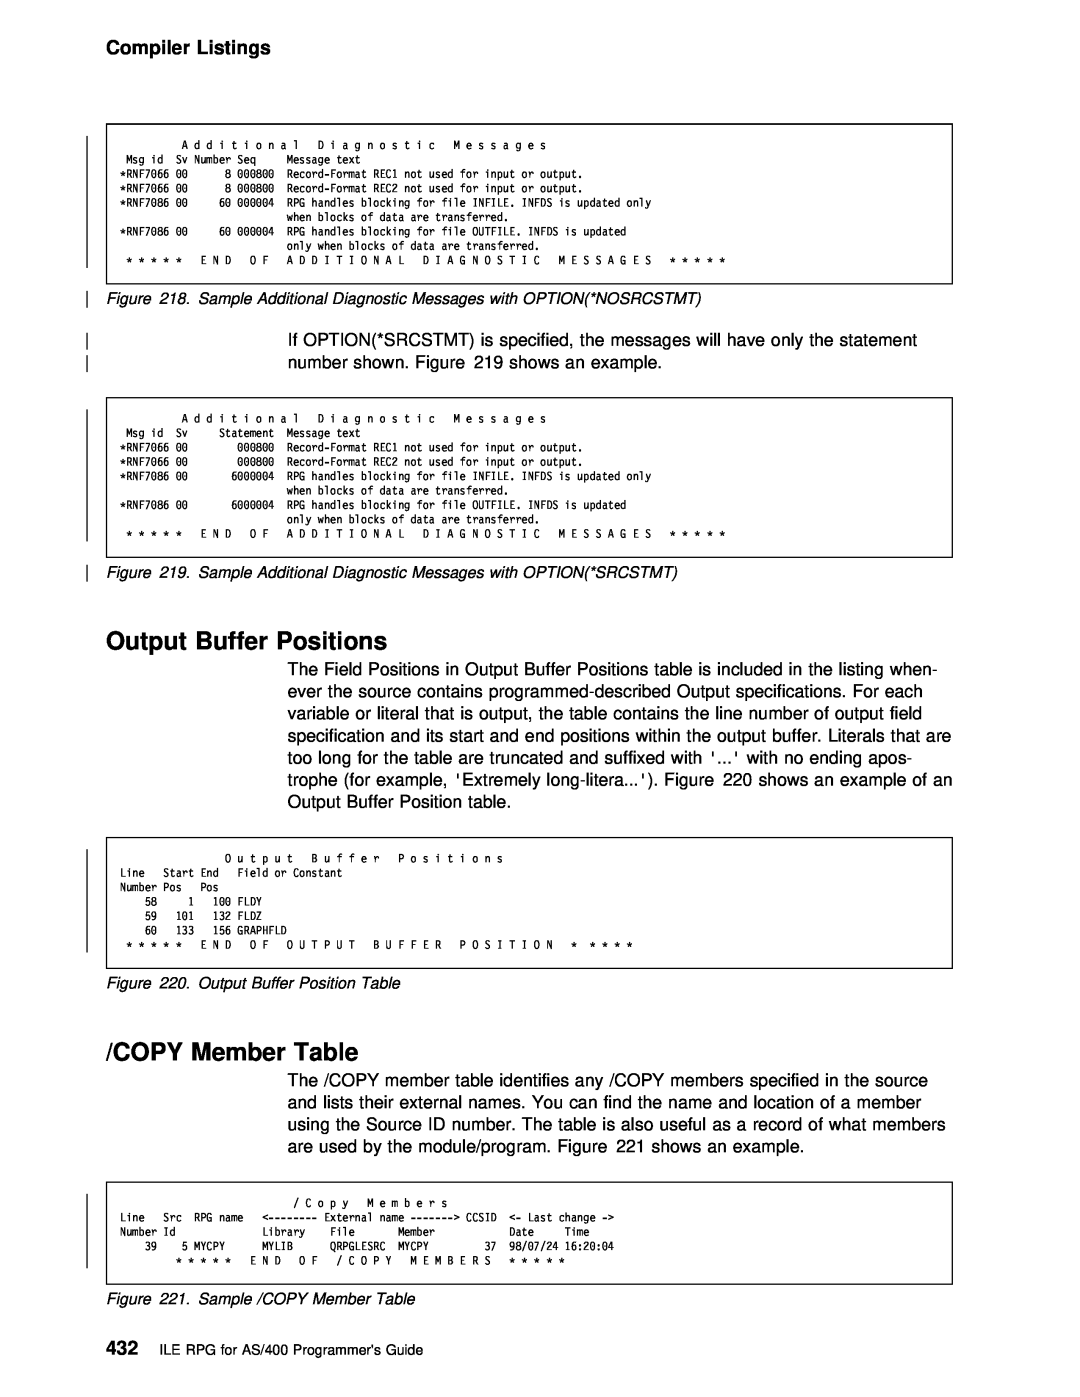 IBM AS/400 manual Output Buffer Positions, COPY Member Table, Compiler Listings, Output Buffer Position Table 